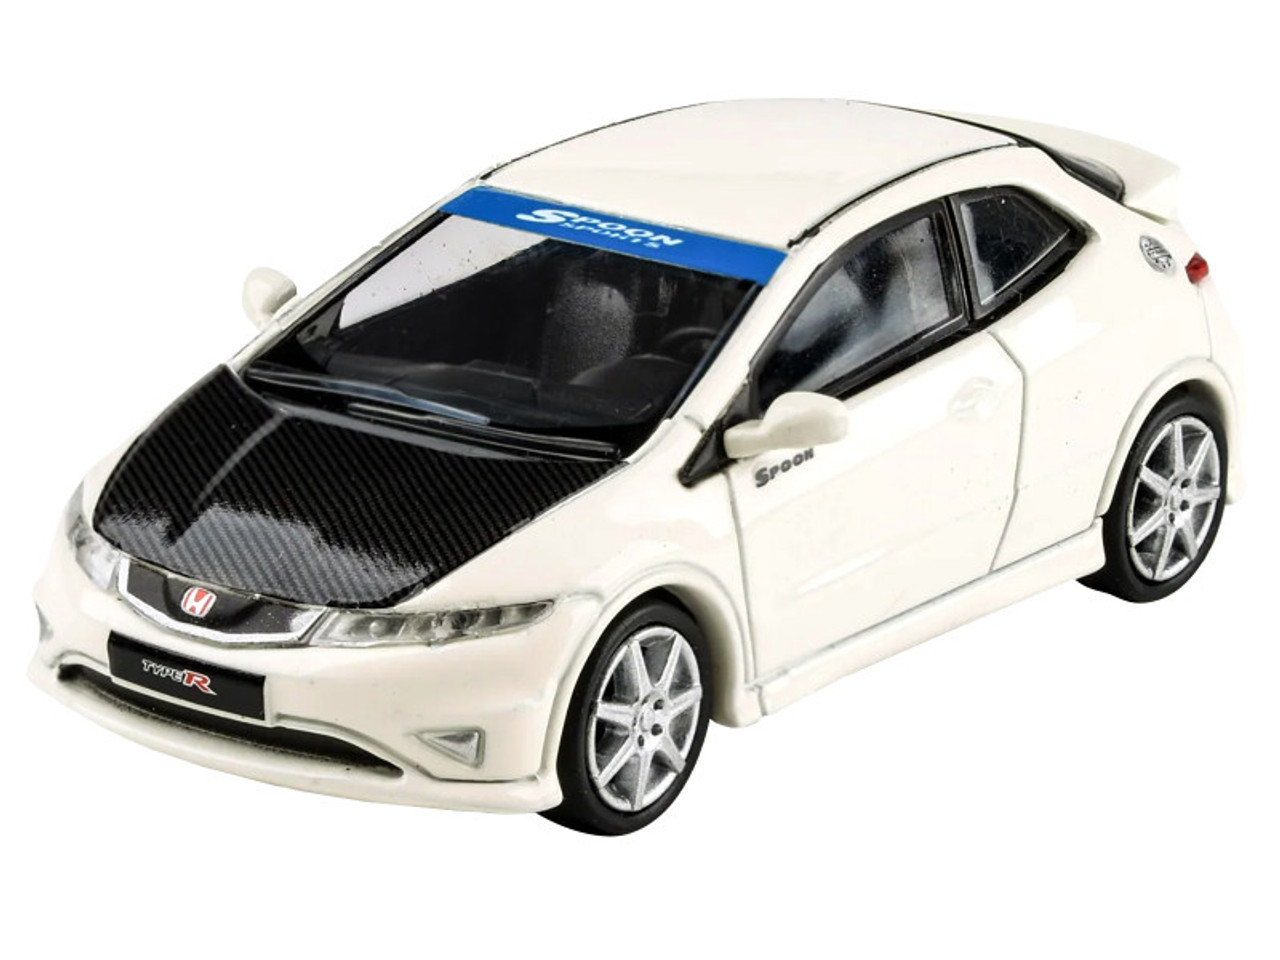 1/64 Paragon 2007 Honda Civic Type R FN2 (White with Carbon Hood) Diecast Car Model